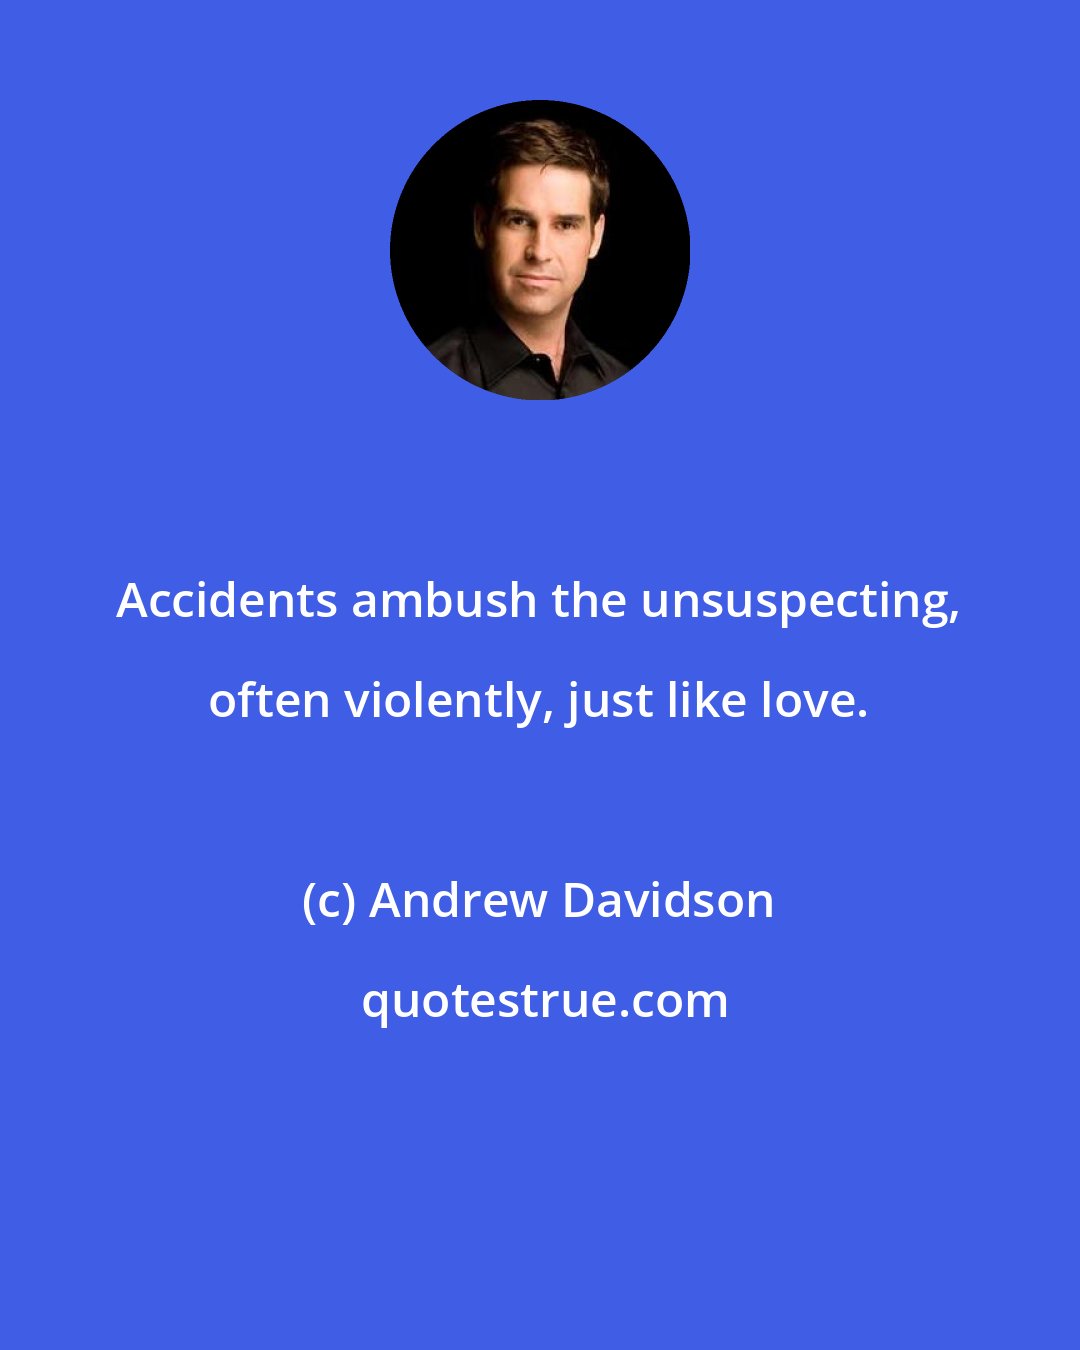 Andrew Davidson: Accidents ambush the unsuspecting, often violently, just like love.